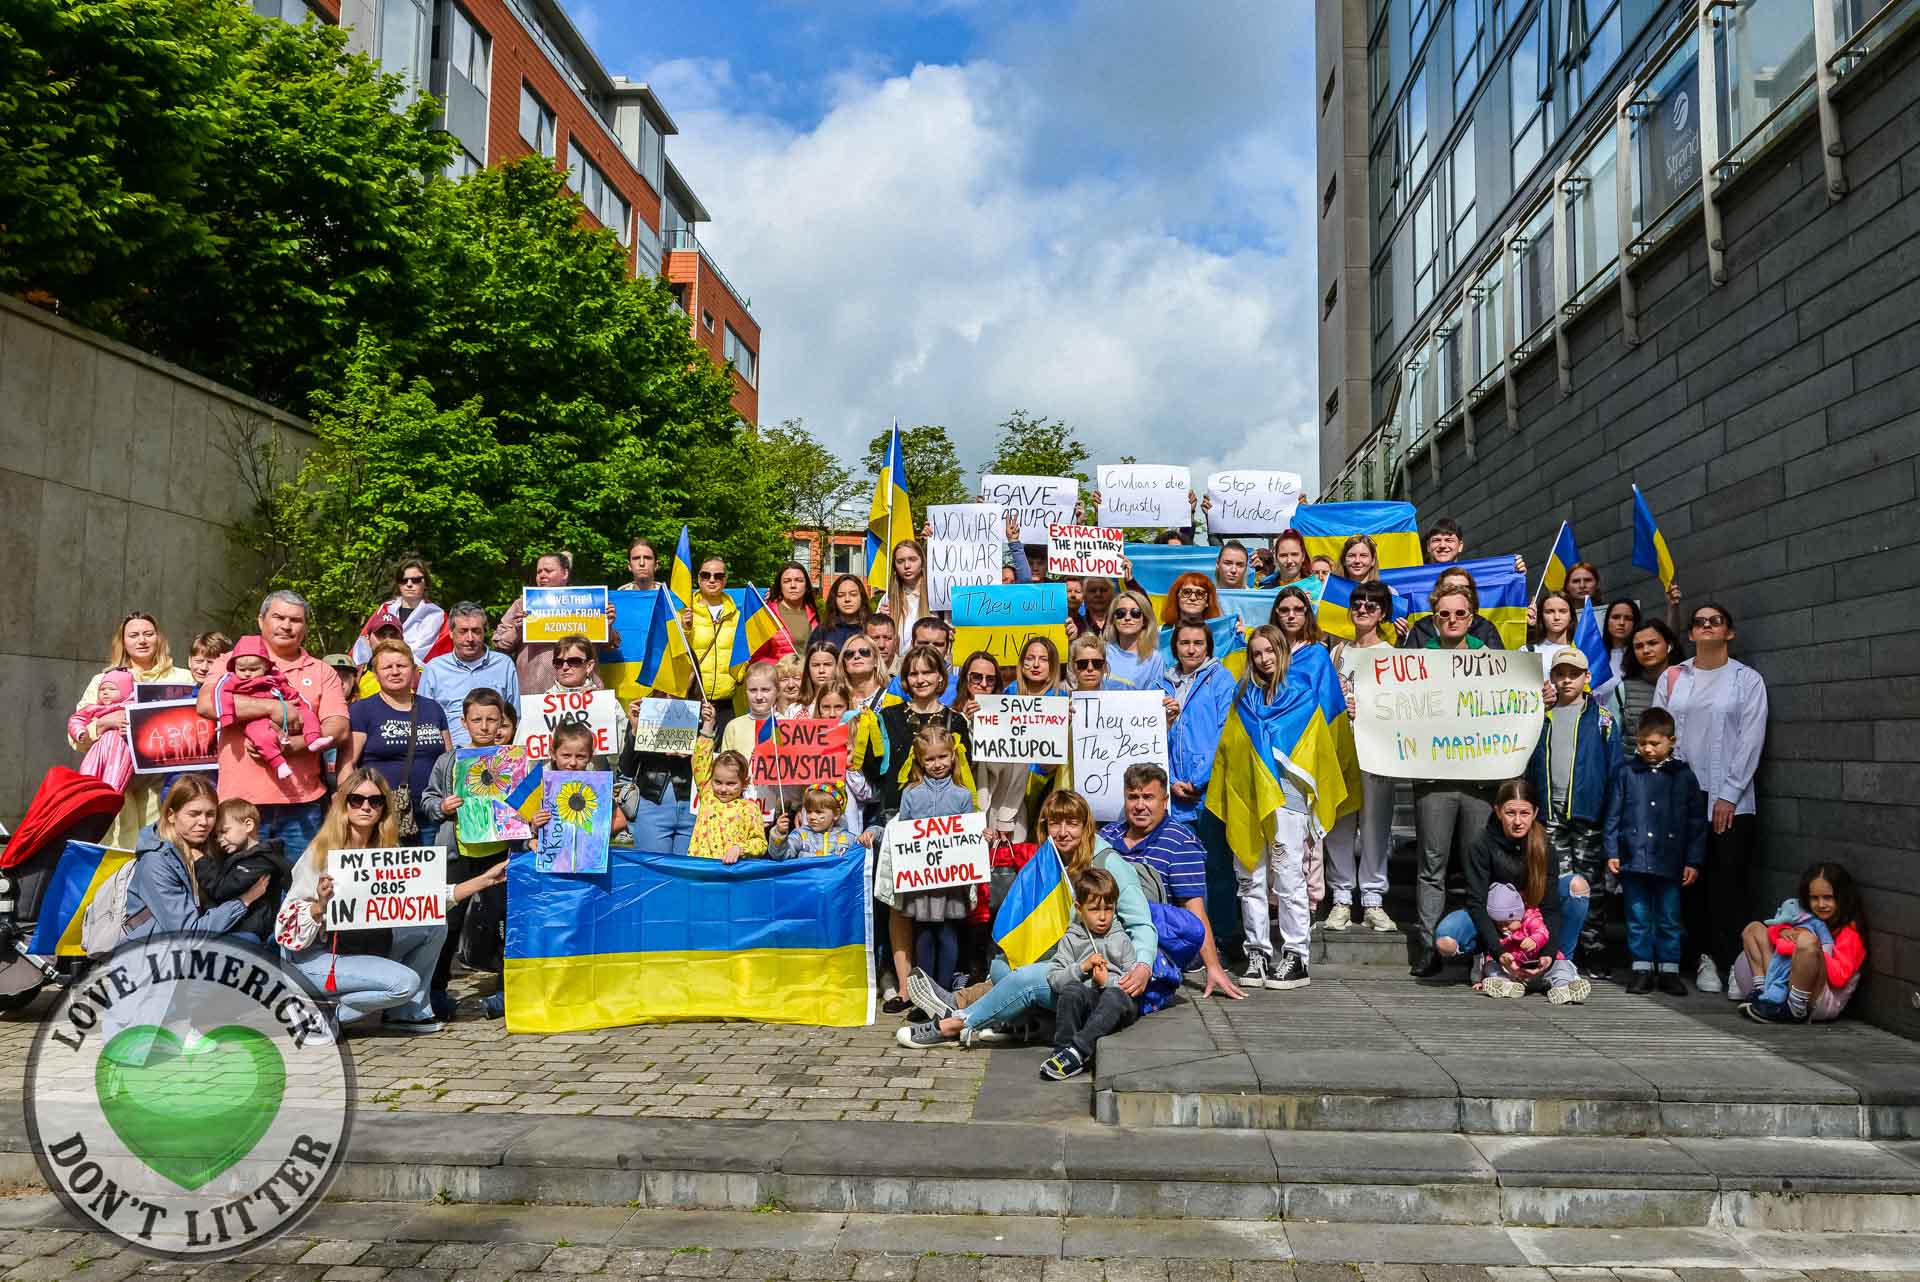 Limerick Save Mariupol - Ukrainians gathered in a peaceful Limerick Save Mariupol protest on Saturday, May 14 to urge for peace in their home country